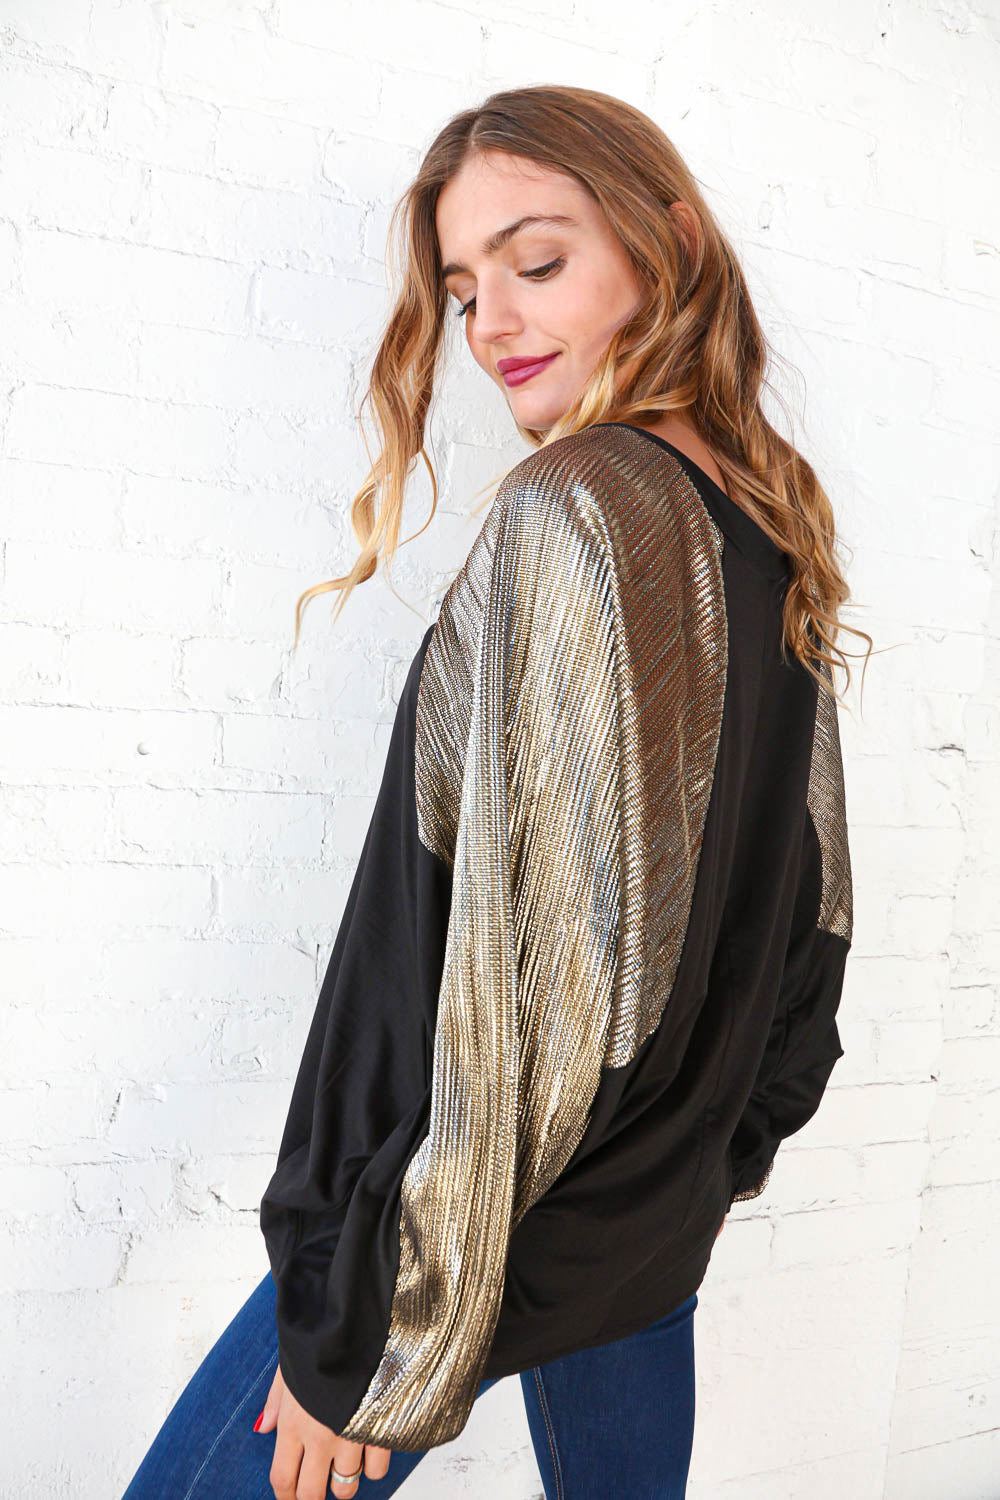 Shimmer and Sass Top